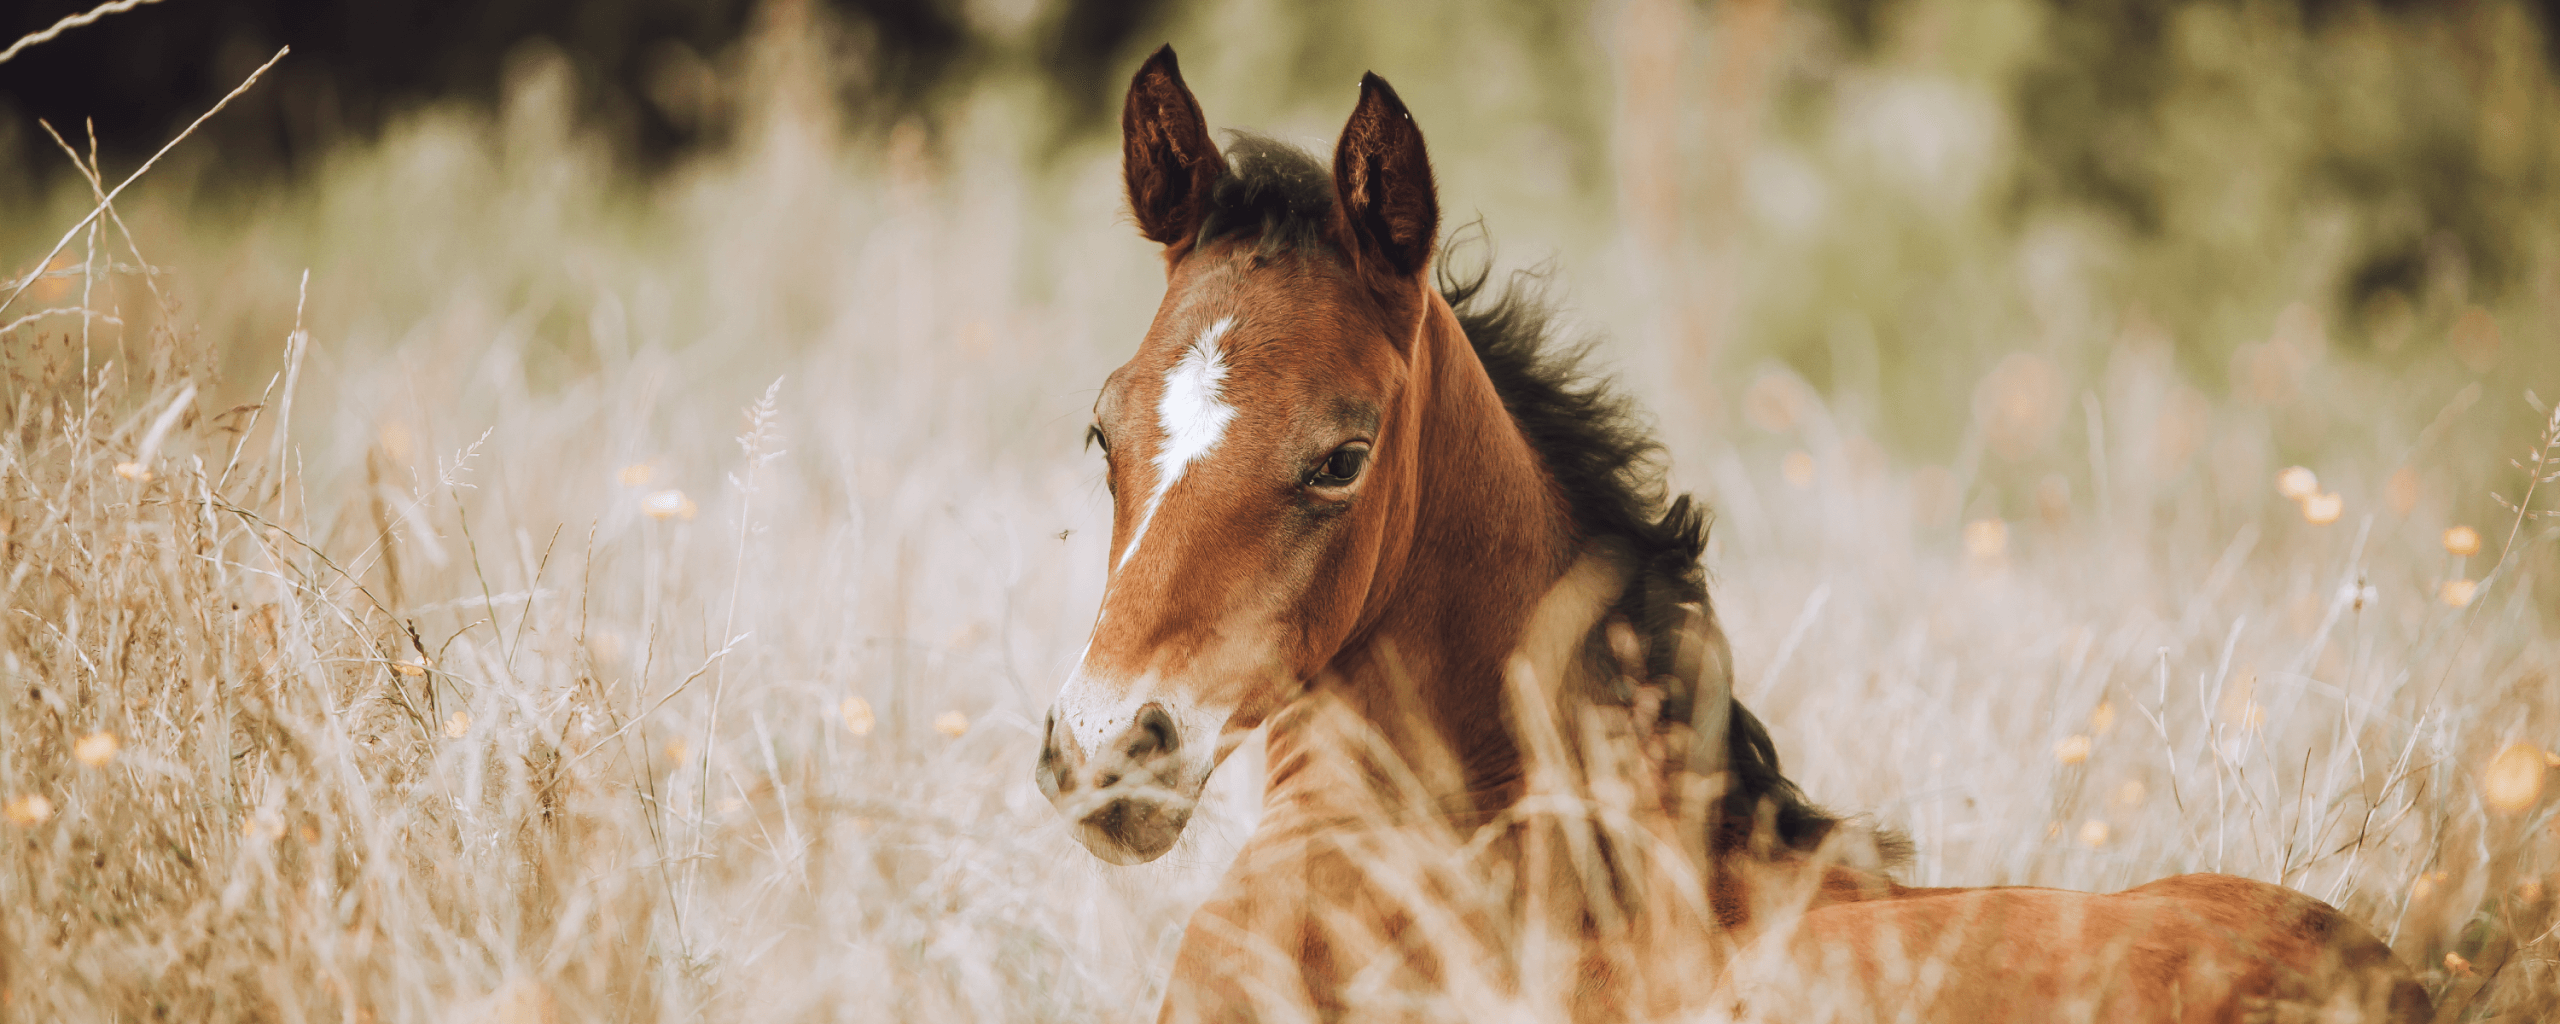 Our range of equine feeds has been developed to meet the specific needs of the horse’s unique digestive system.<br>
Beneficial for all breeds and types of horses, as well as addressing all the issues and levels of work that come with modern day horse management.